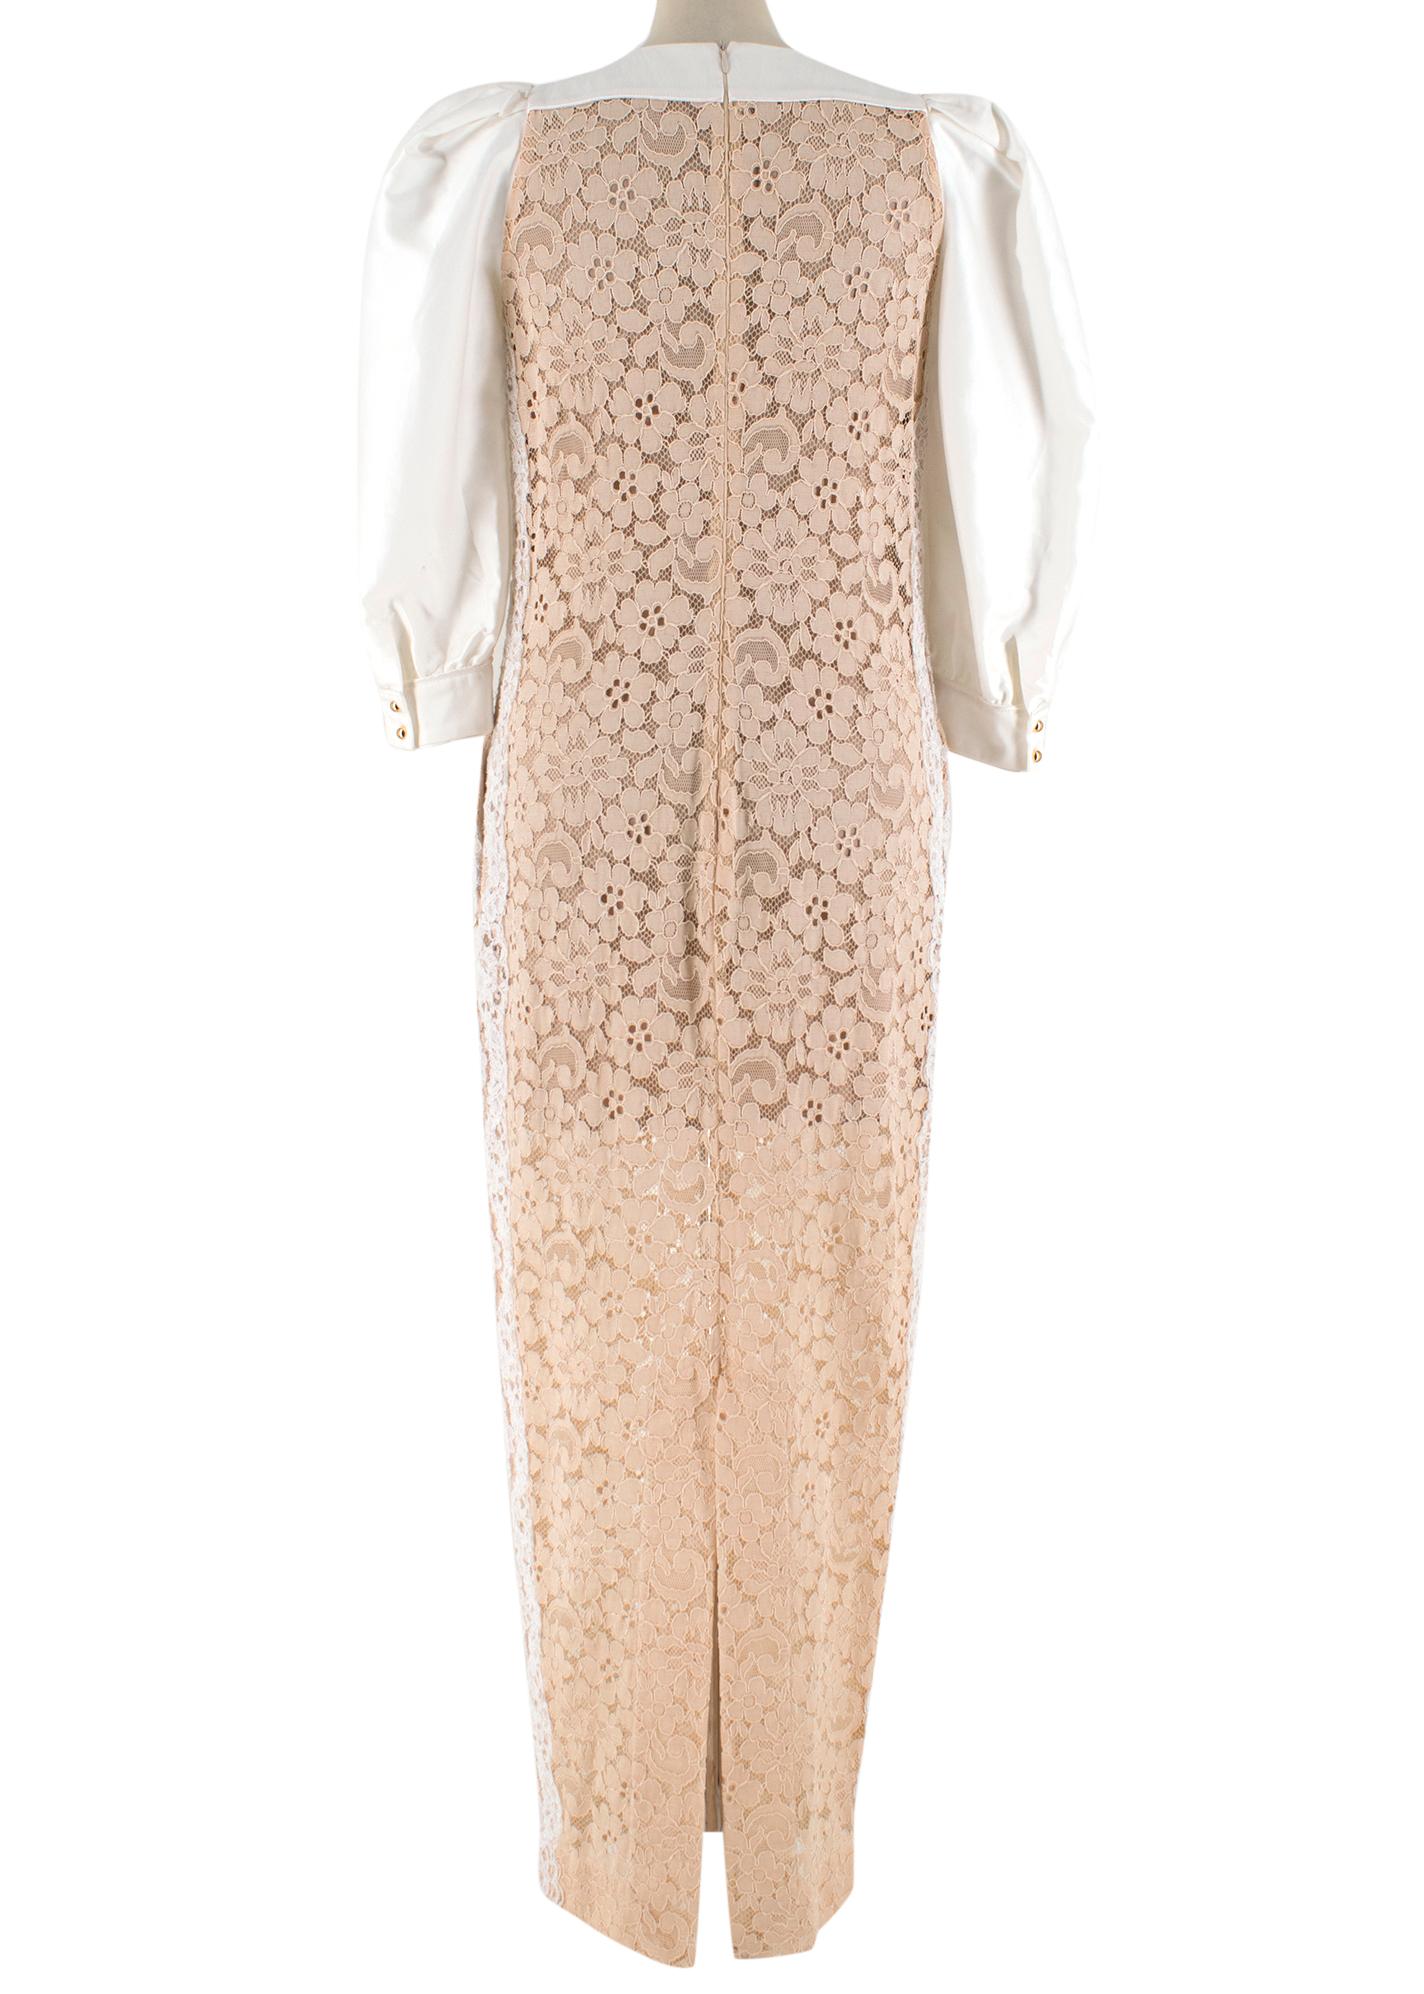 Beige Alessandra Rich Nude Floral Lace Dress w/ Puff Sleeves - Size US 4 For Sale